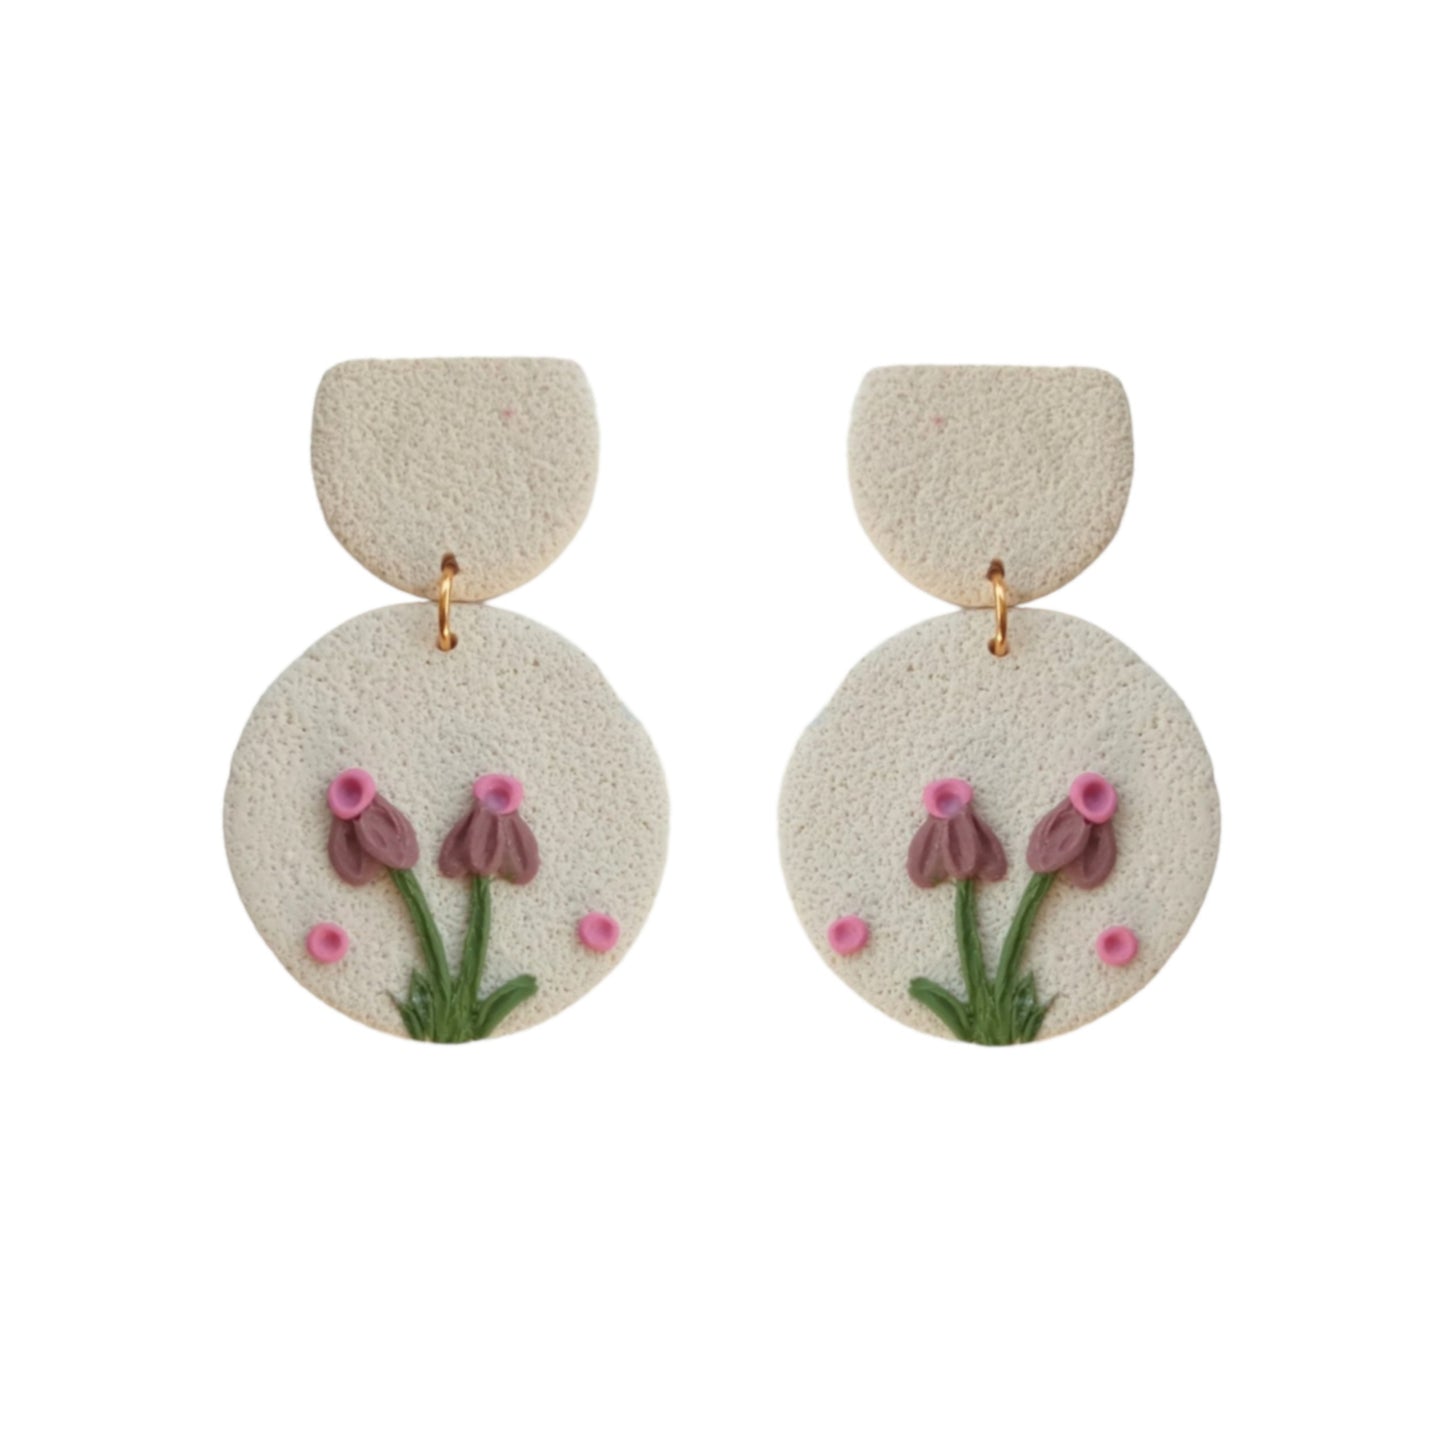 Ivory floral statement earrings